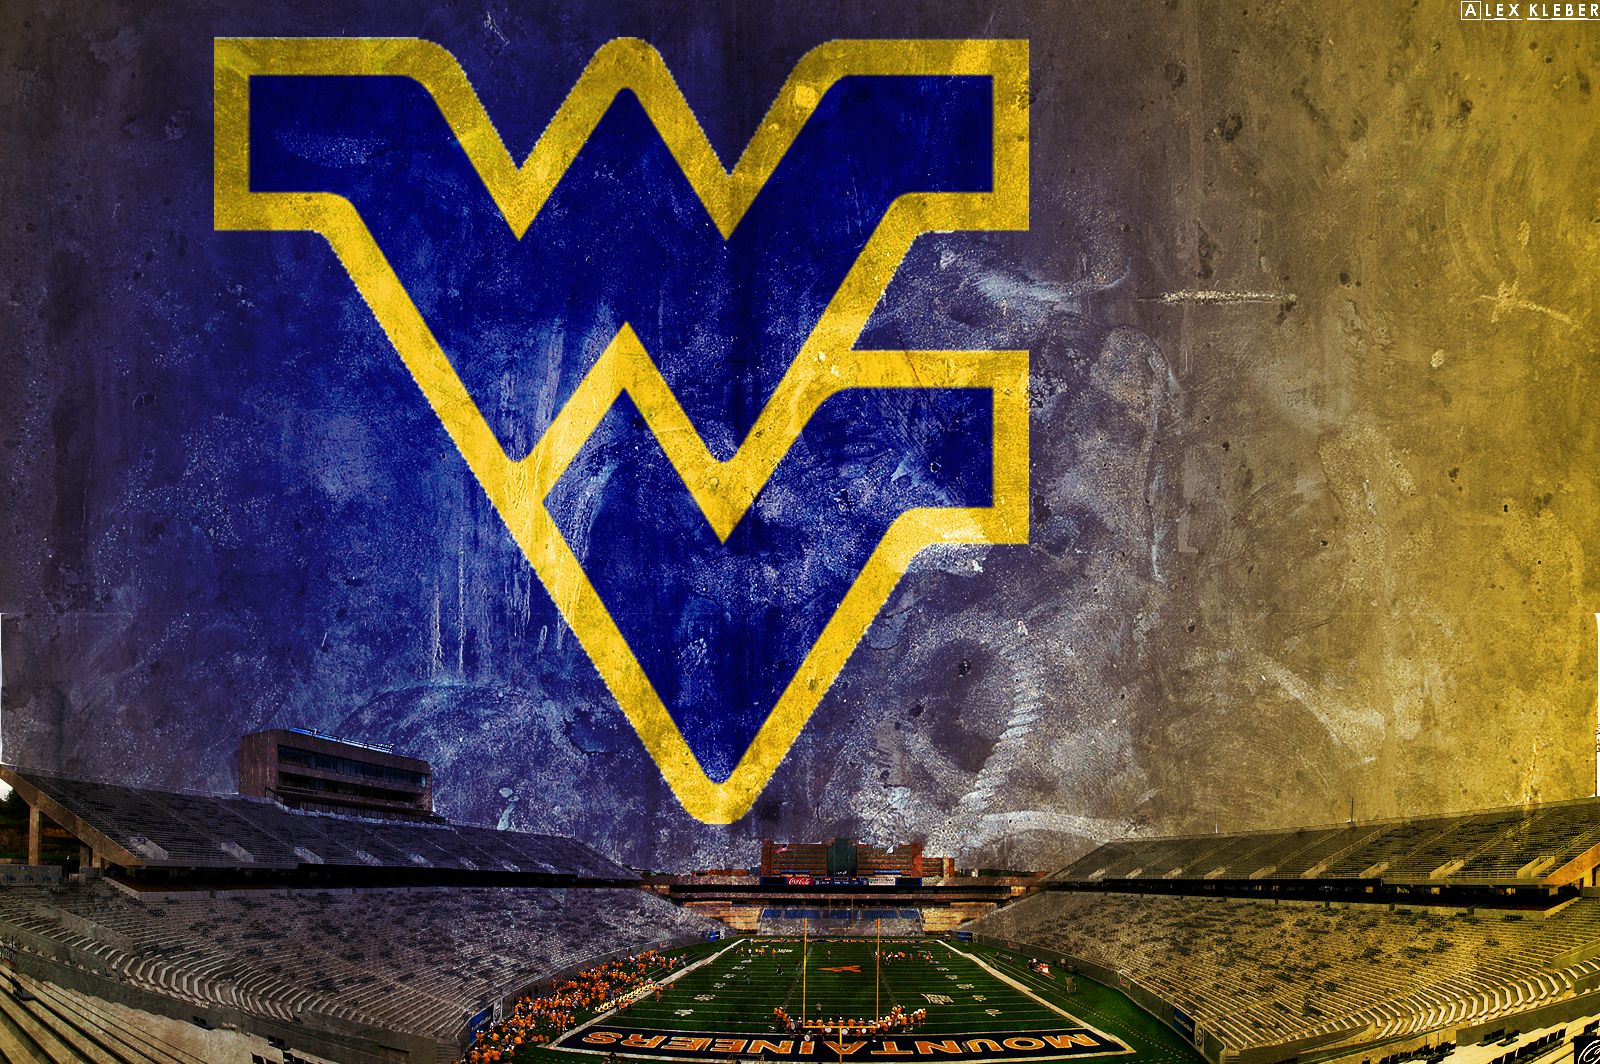 Pictures Of Wvu Mountaineers Wallpaper By Klebz Things I